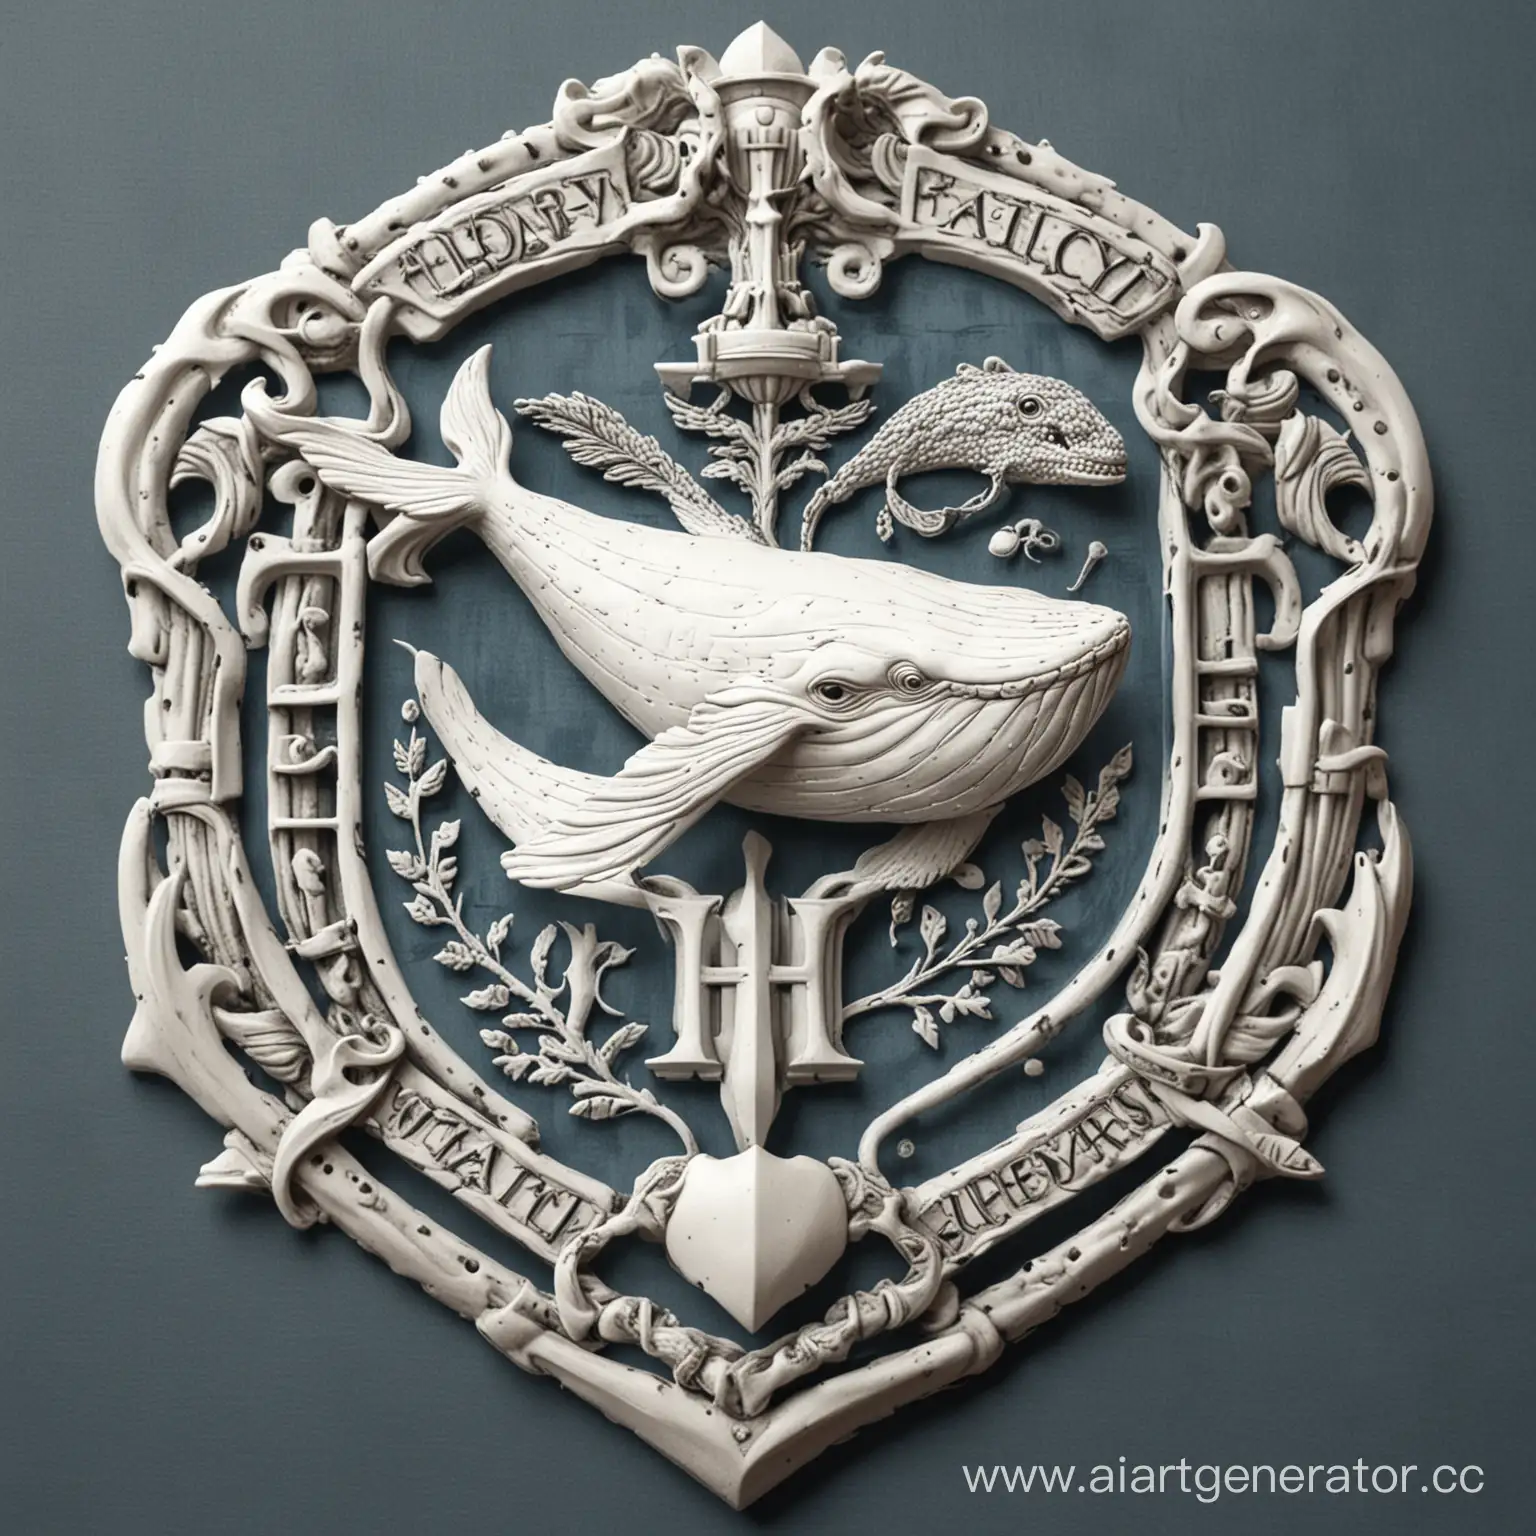 Whale-Emblem-of-Hogwarts-New-Faculty-in-White